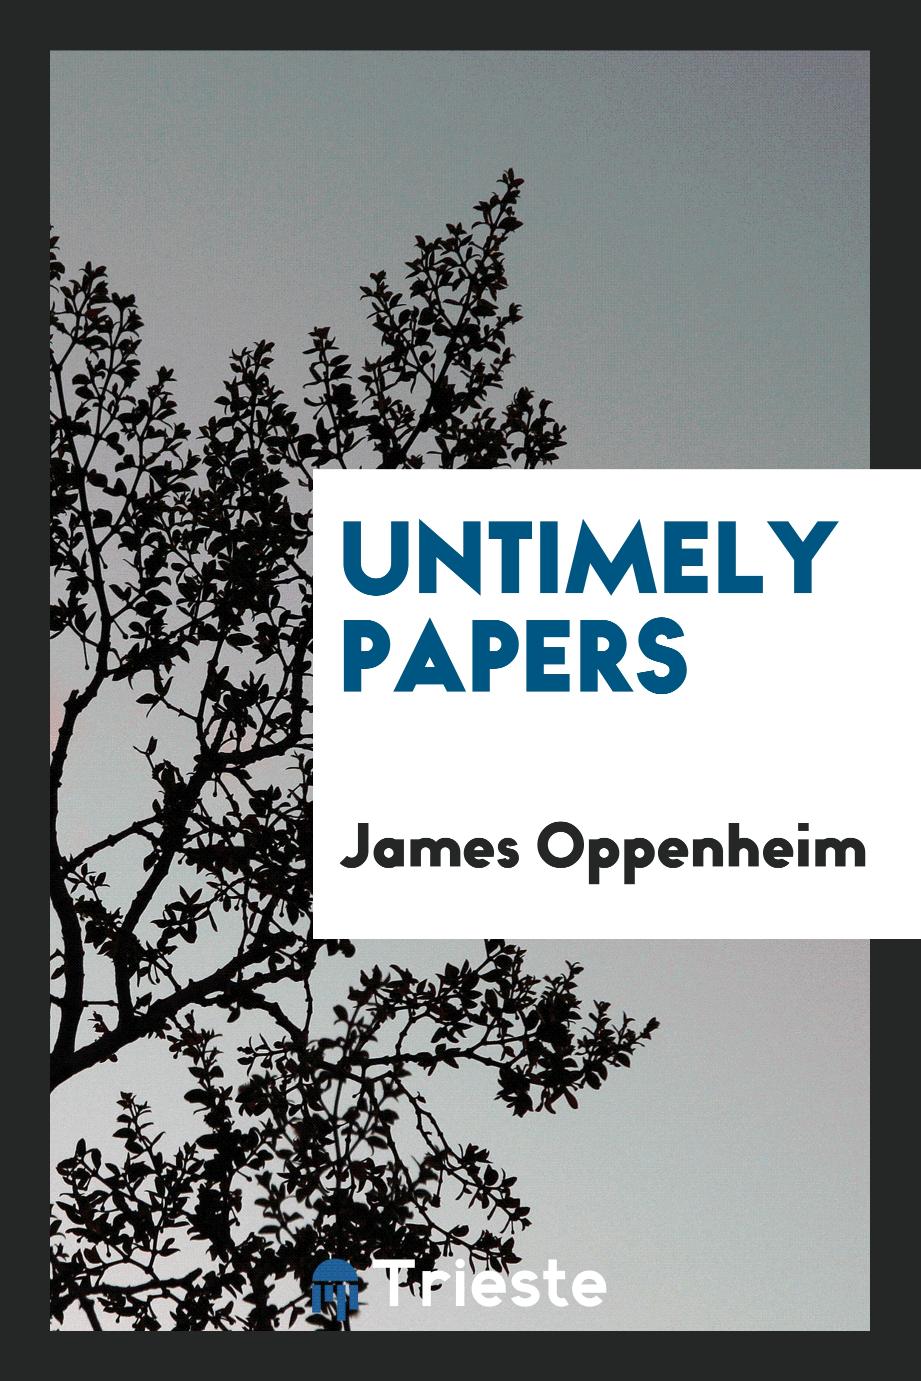 Untimely papers